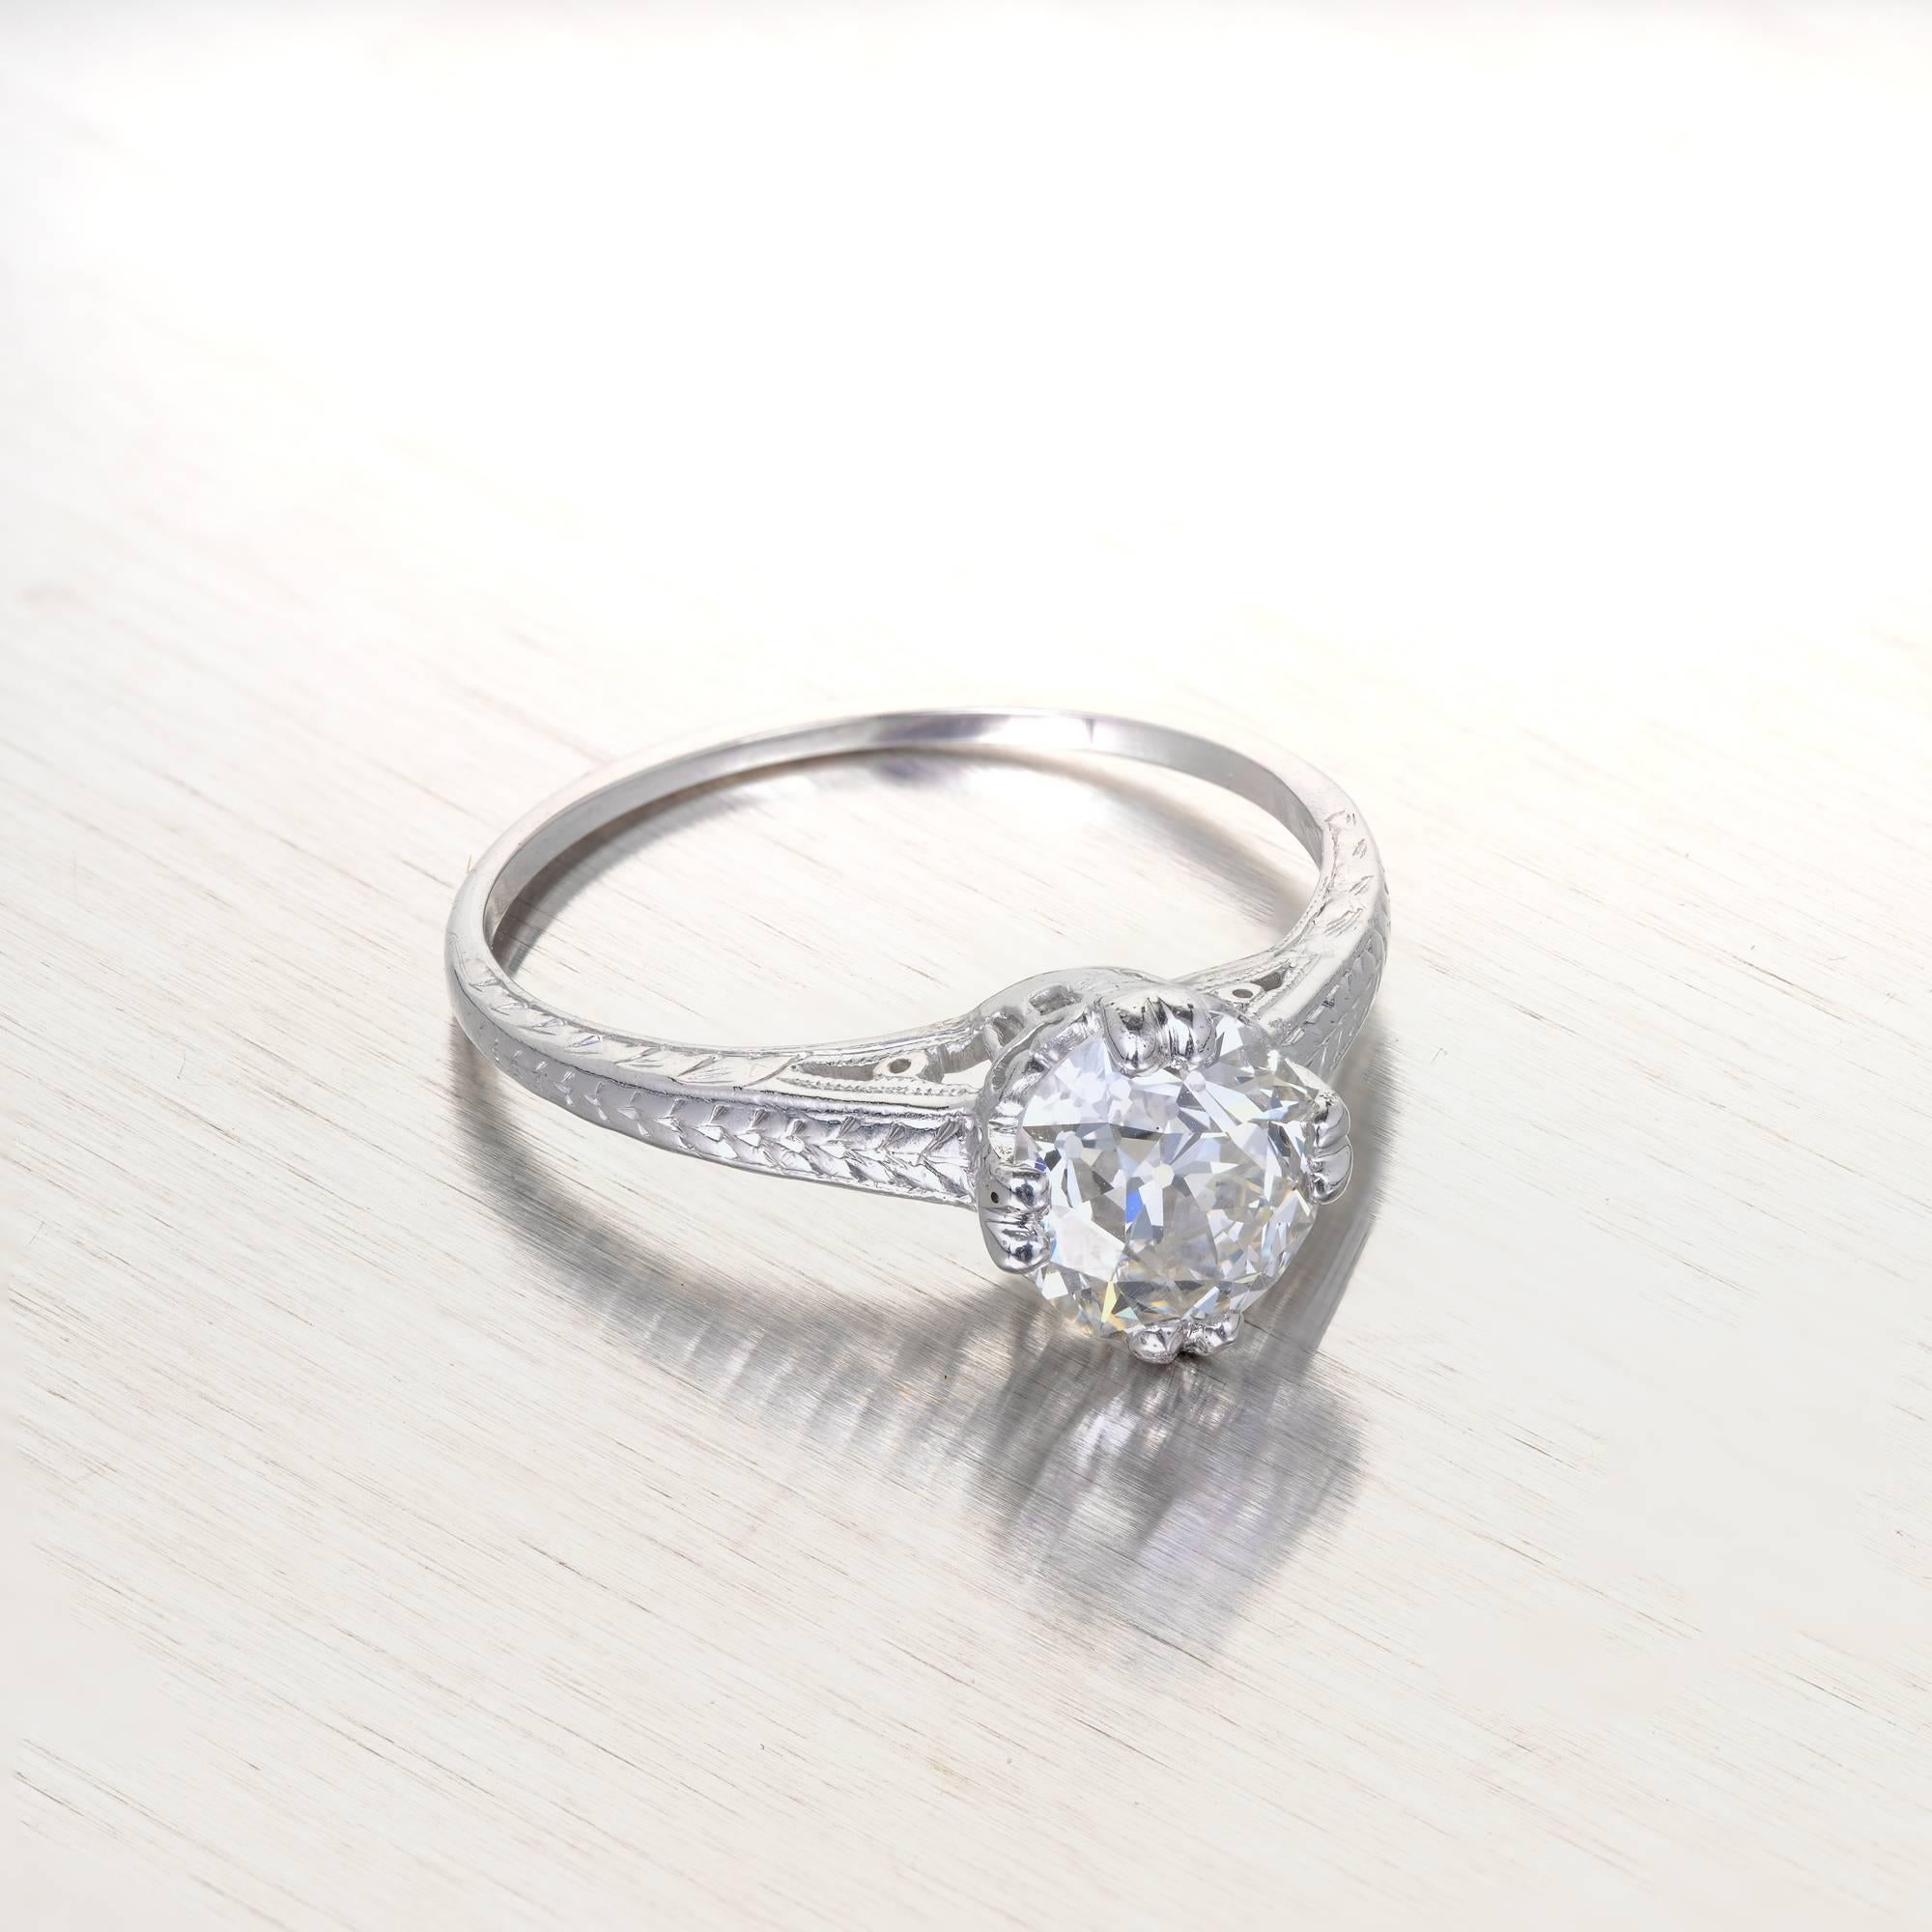 Original 1890s engraved filigree solitaire engagement ring in a platinum setting.  GIA certified as oval with old world cutting and beauty. Raised crown and small table, open culet. 

1 oval brilliant cut diamond, approx. total weight 1.28cts, I,